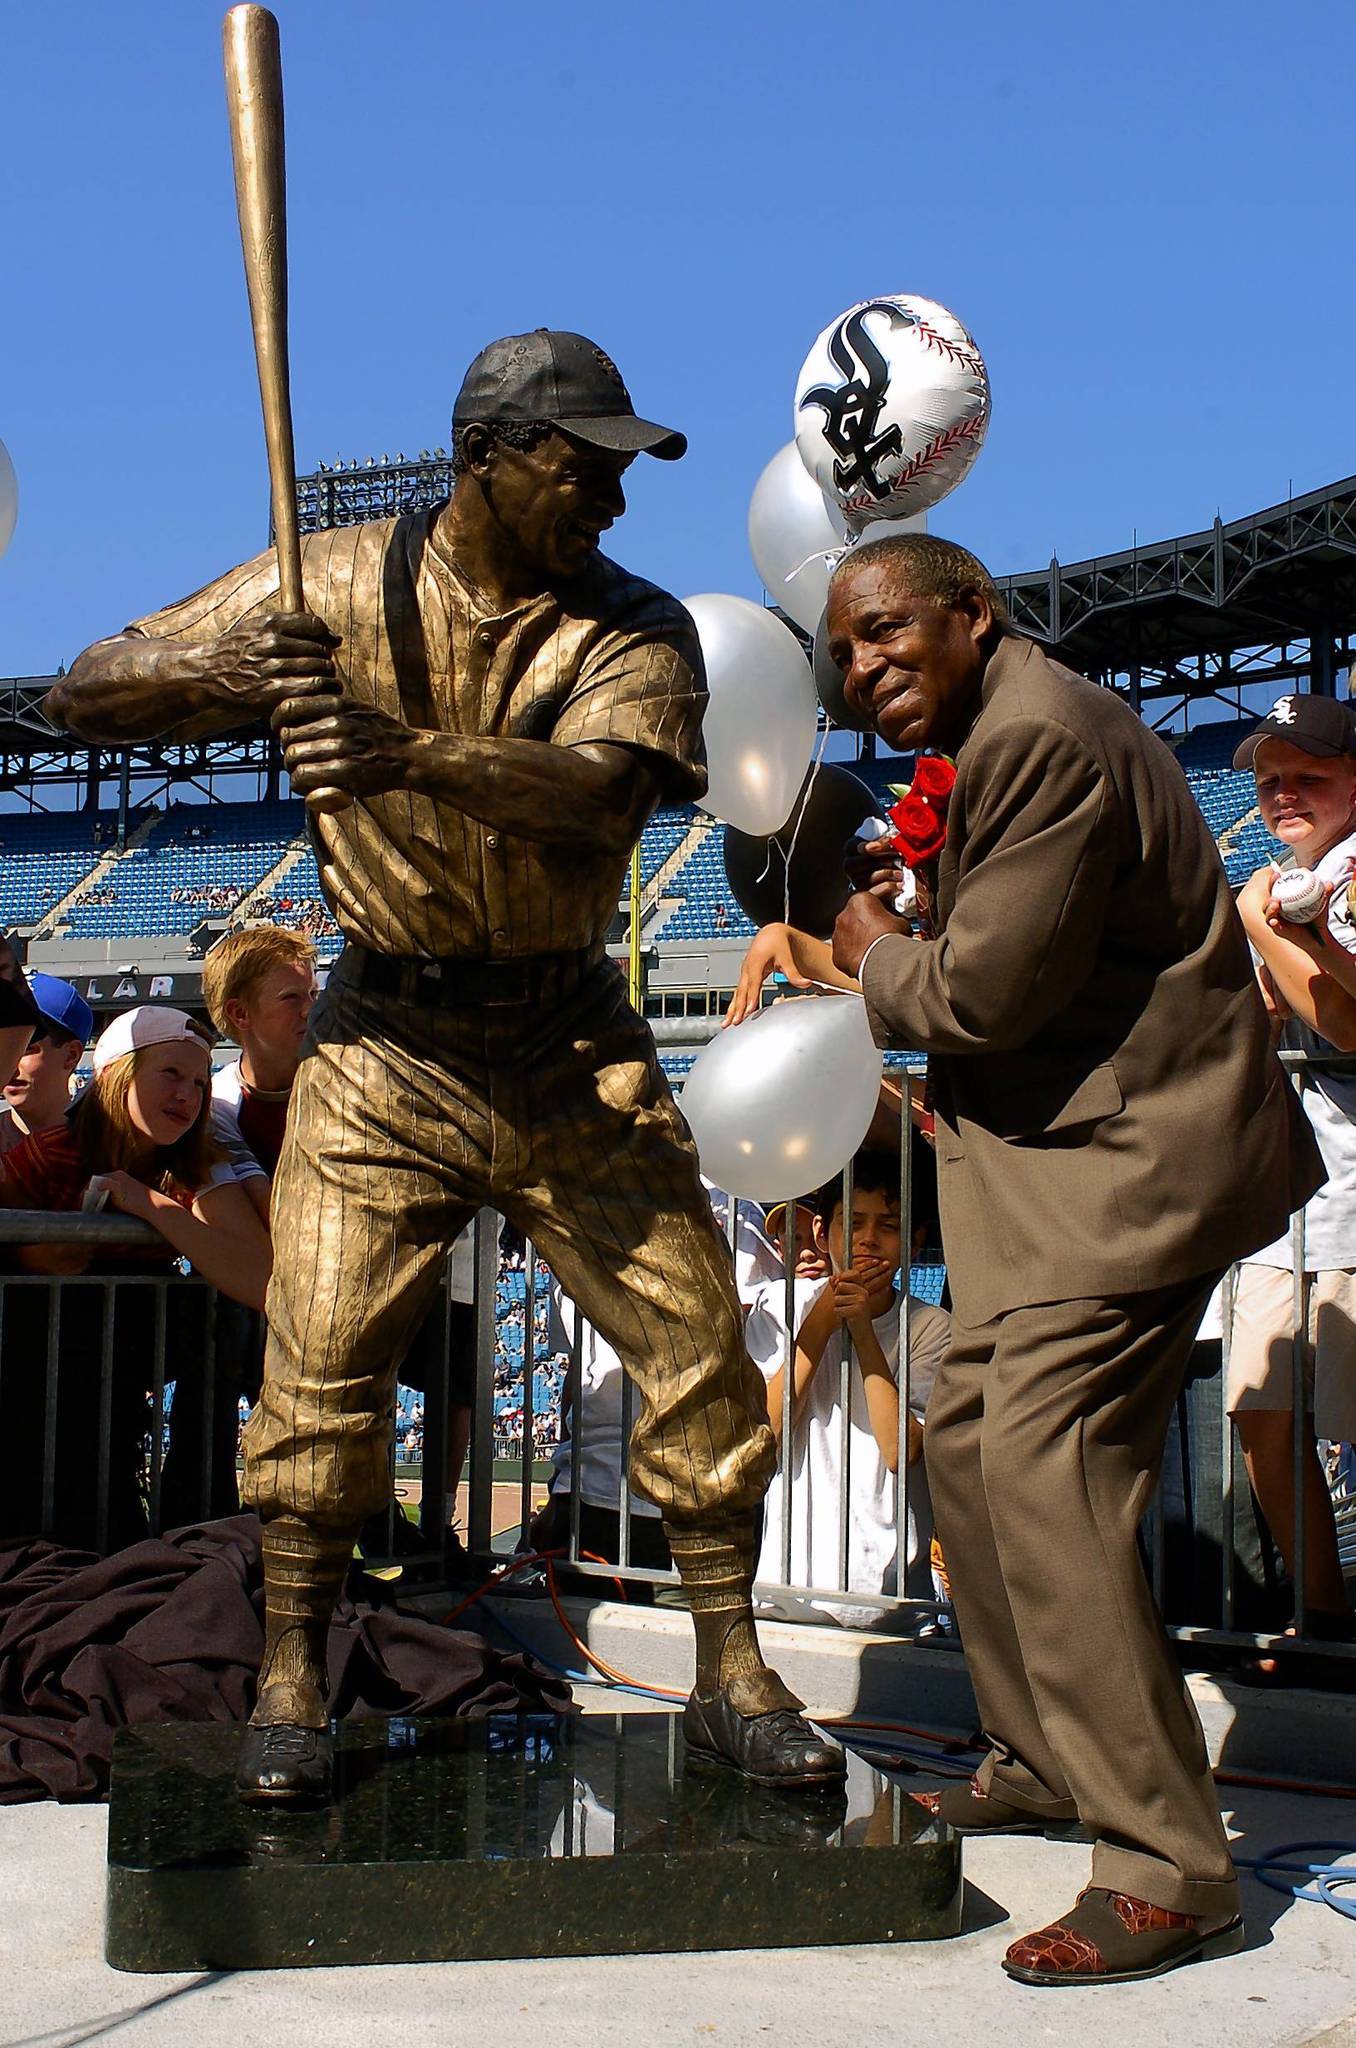 White Sox, Cubs to honor Minnie Minoso, Ernie Banks with throwback